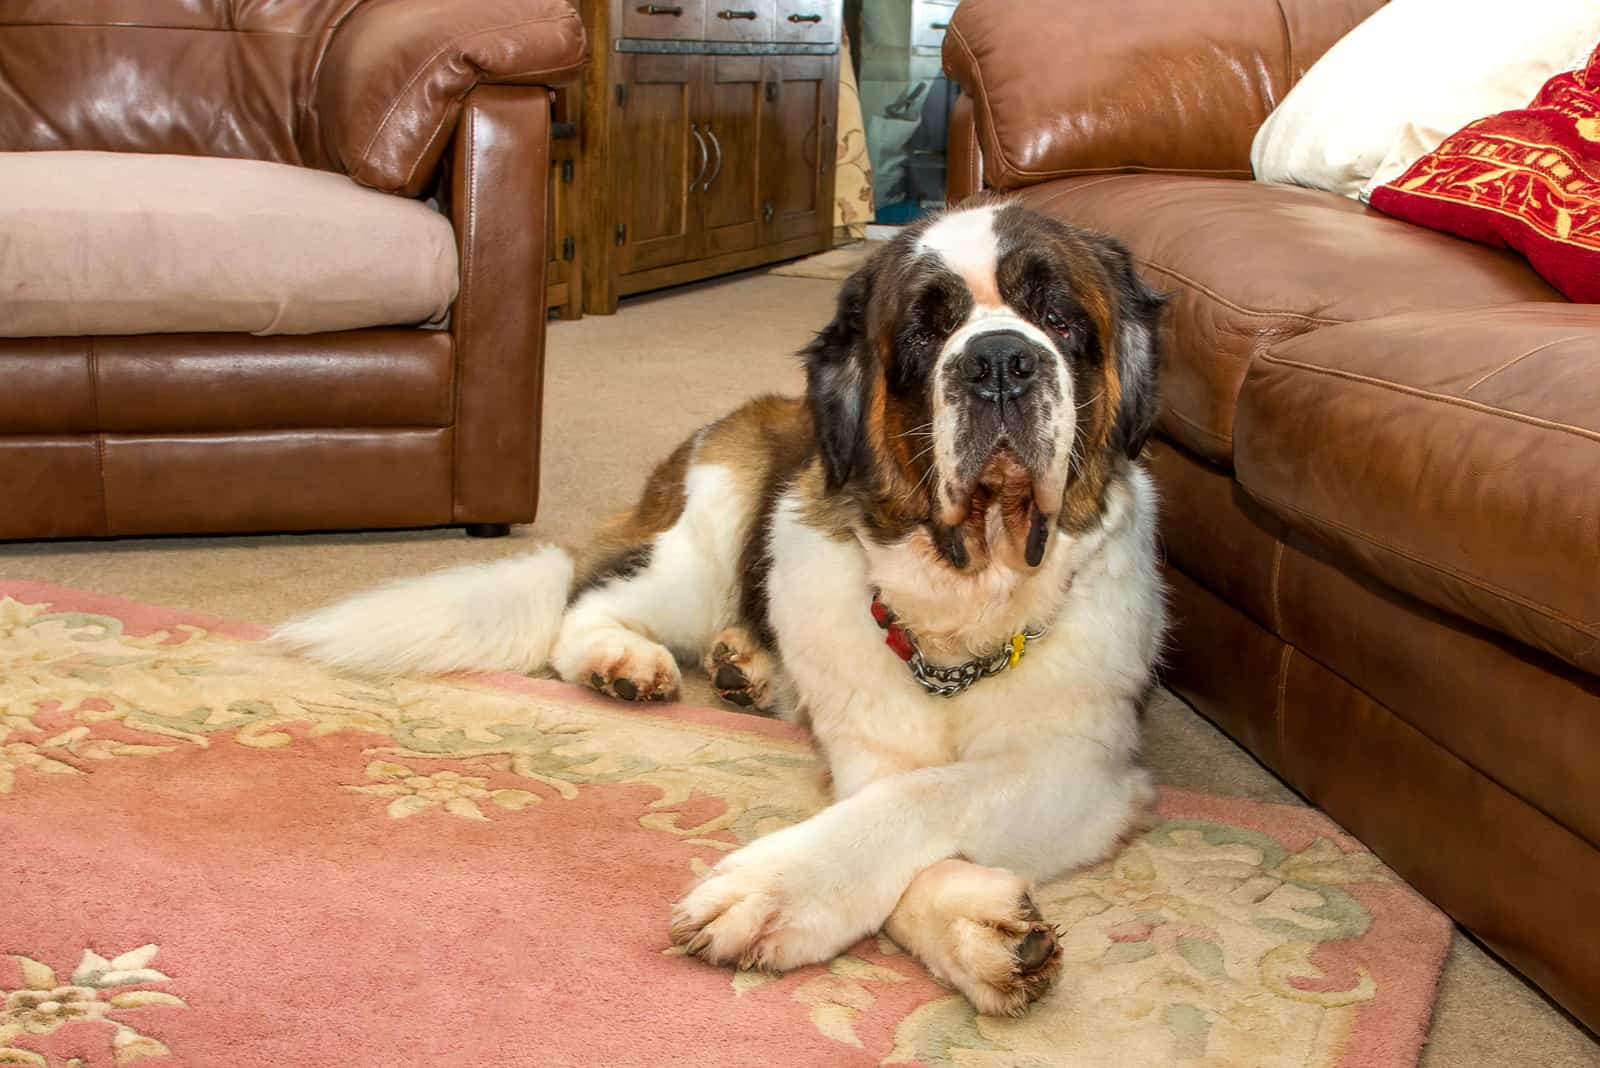 Saint Bernard dog is lying on the floor next to the couch